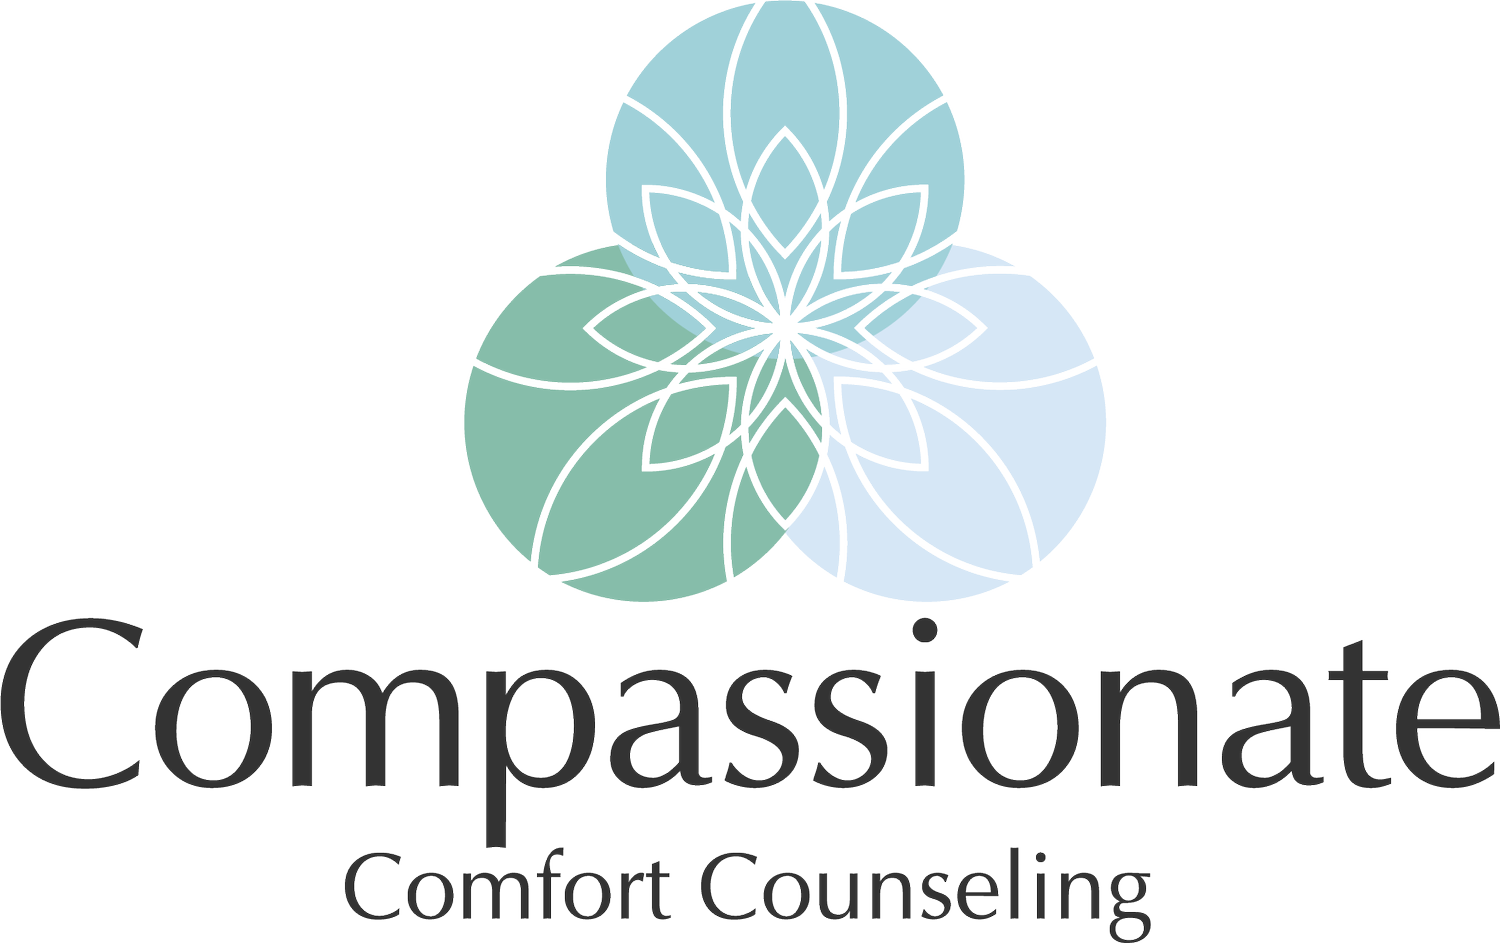 Compassionate Comfort Counseling